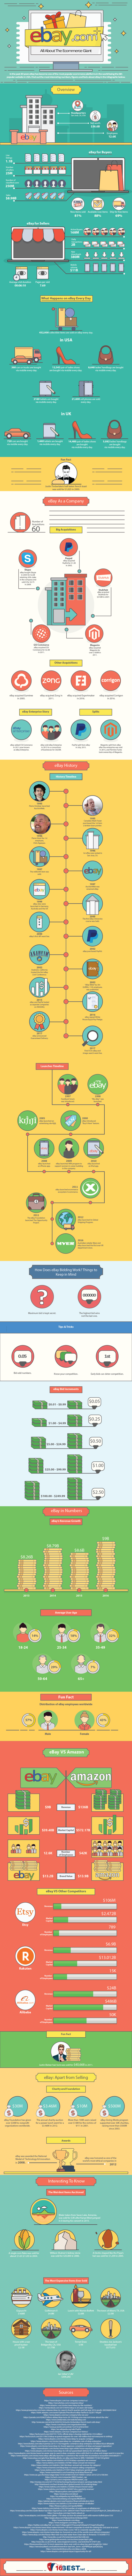 How to sell online successfully eBay infographic